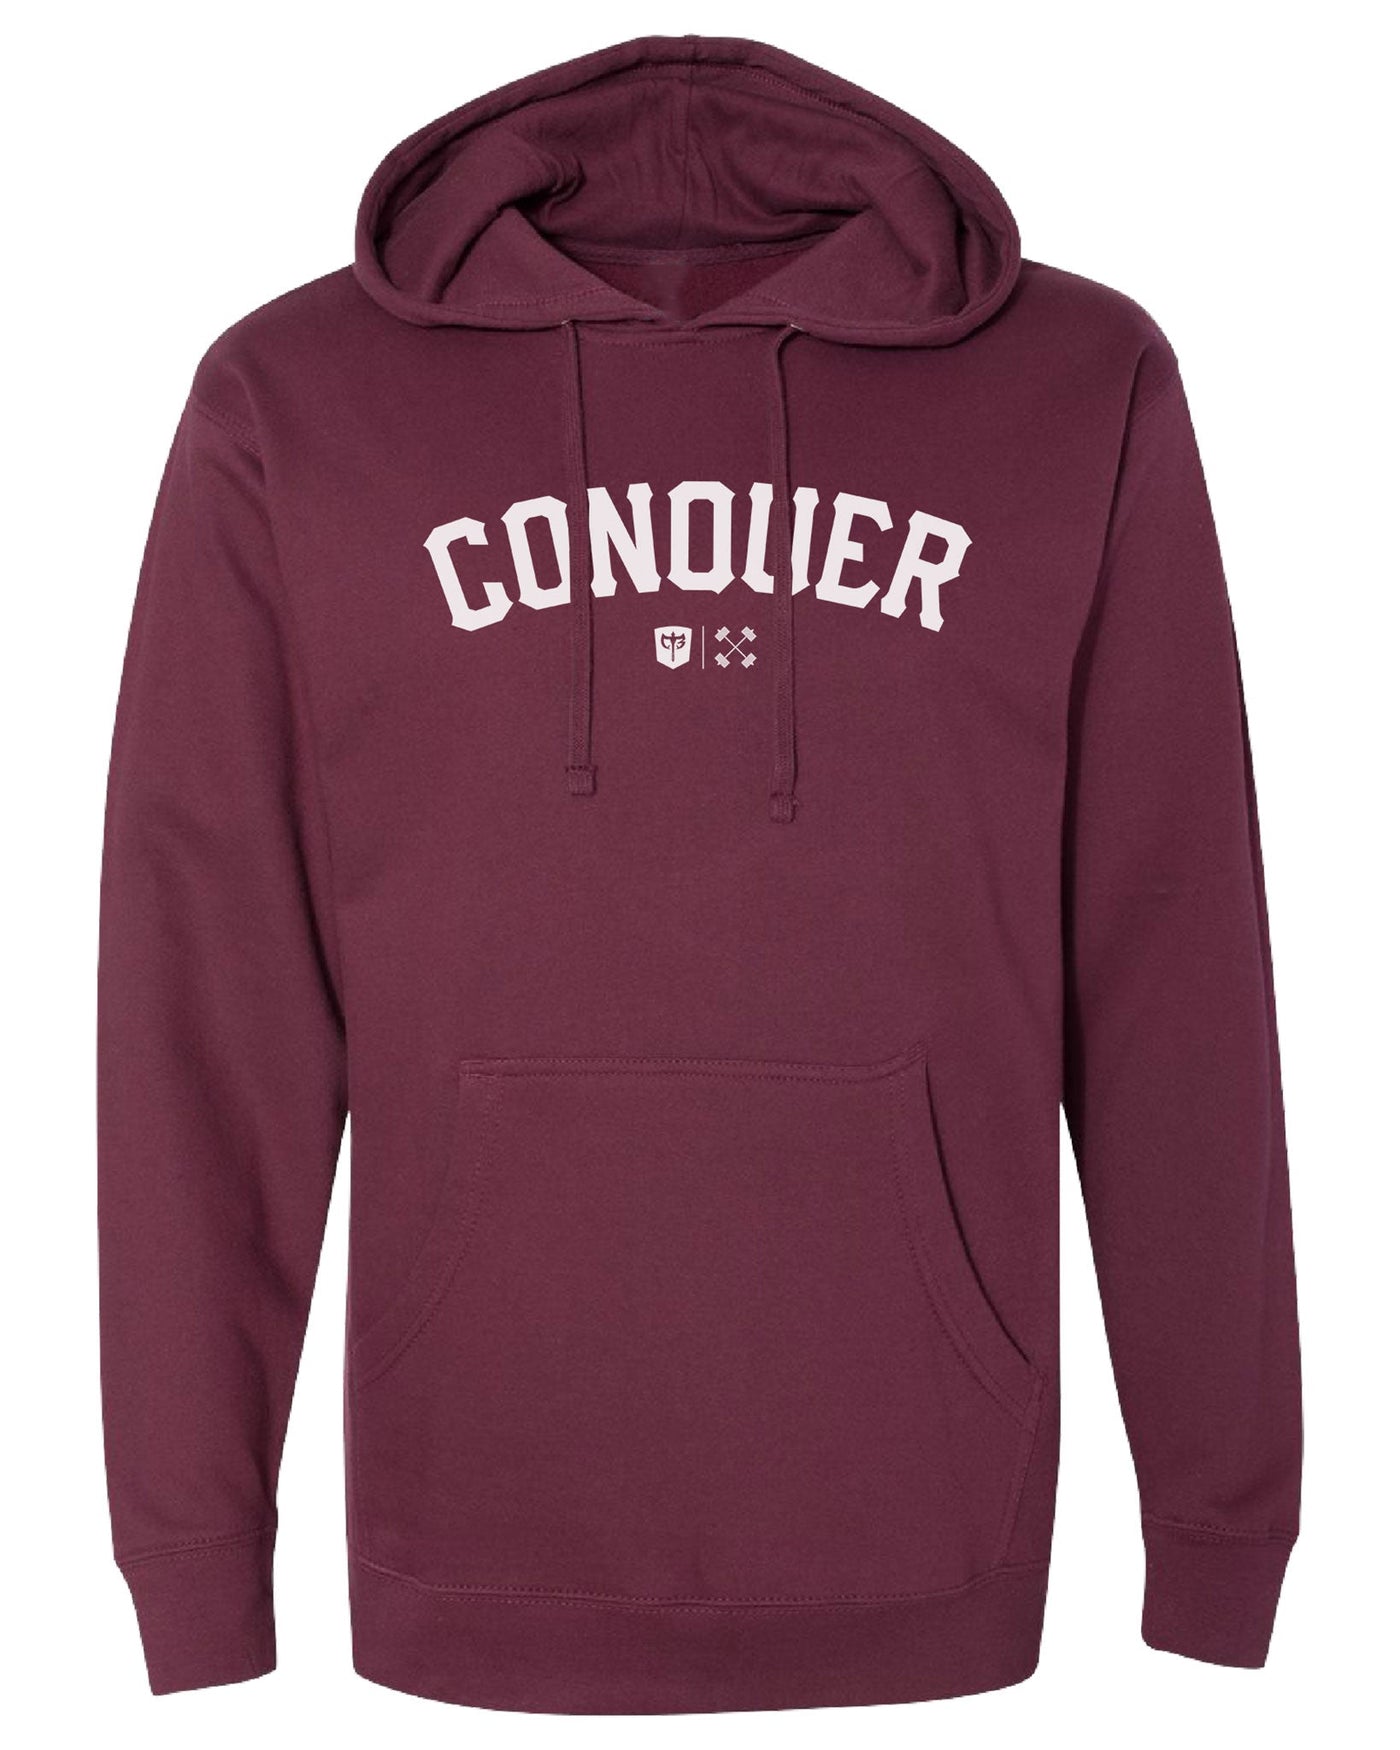 Conquer - Arch - Pullover Hoodie - Conquering Barbell